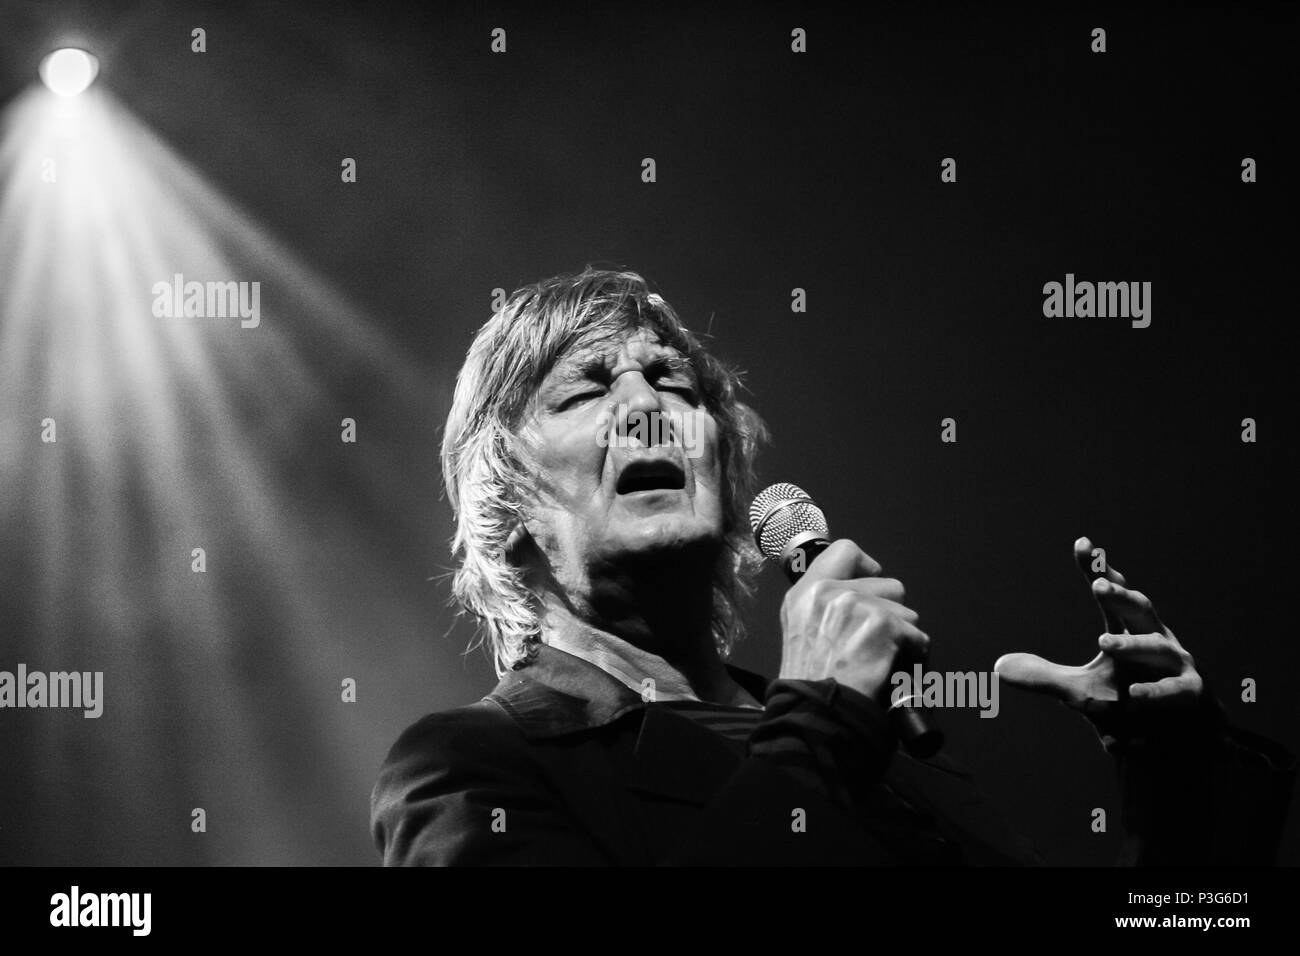 Rouillac (Centrale Francia occidentale). 2010/02/20. Cantante francese Jacques Higelin in concerto Foto Stock